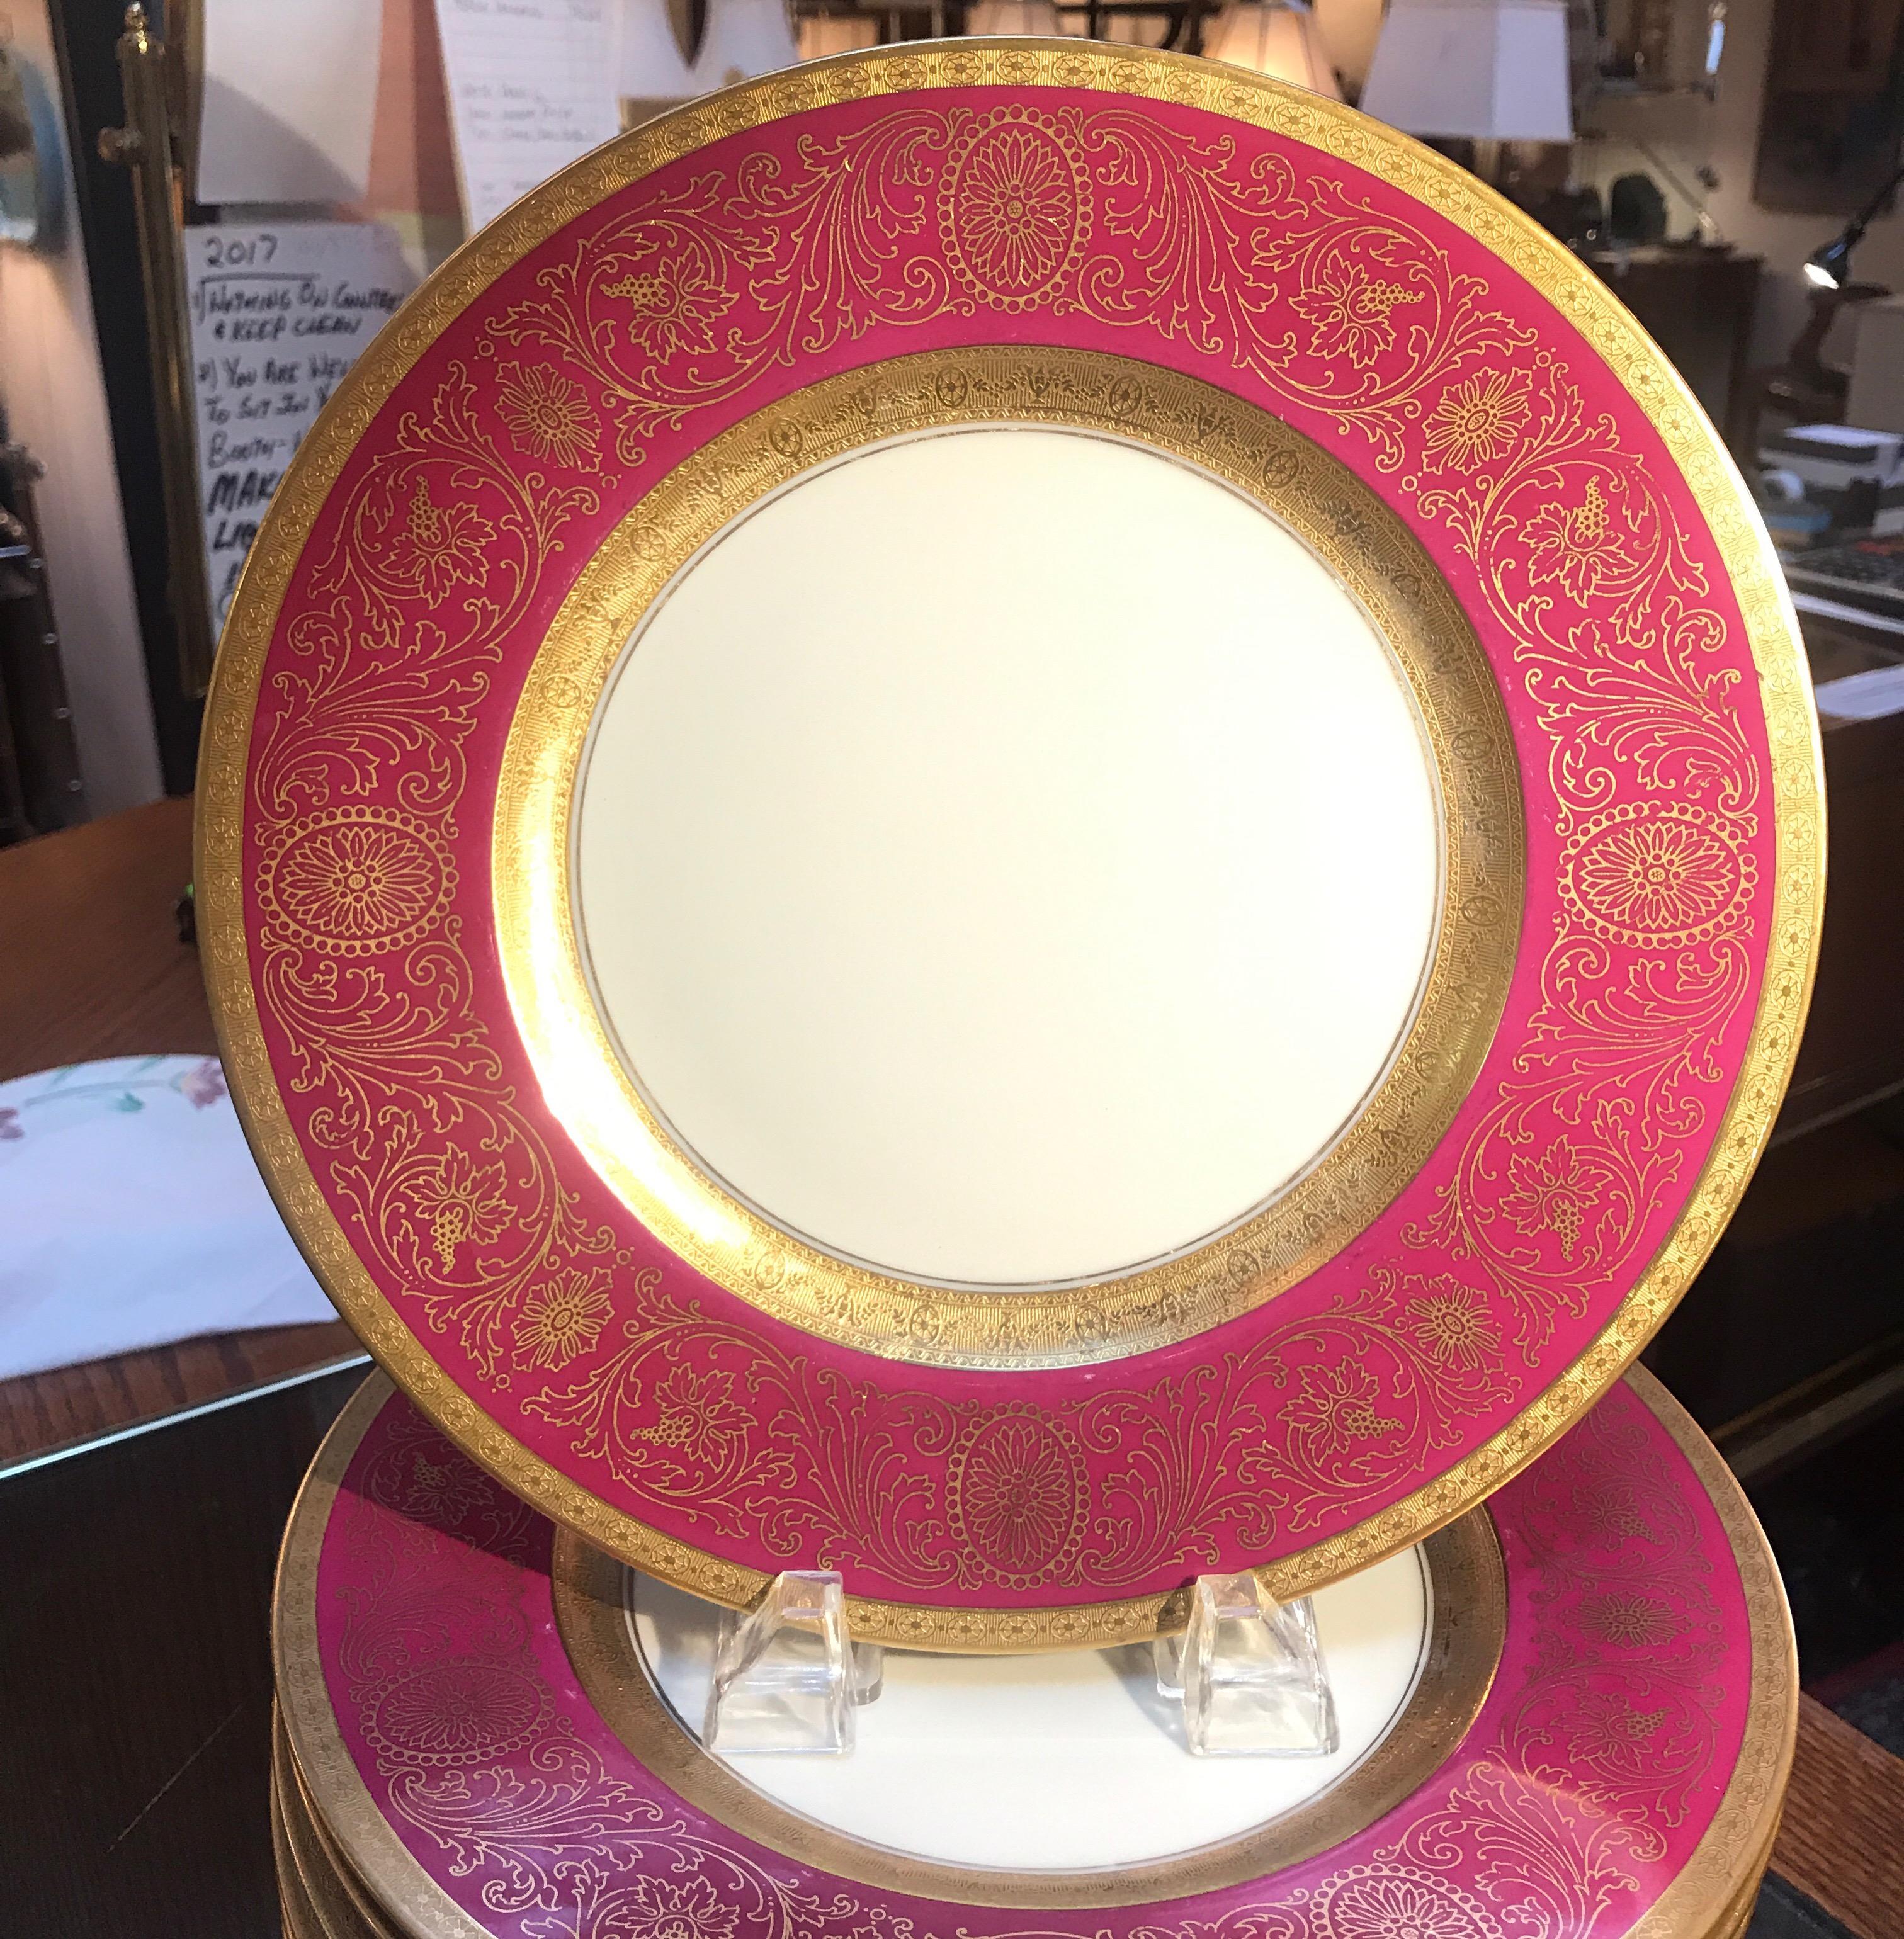 A set of 12 wide bordered service plates with fuchsia and gold borders. The porcelain plates made by Hutschenreuther and decorated by the Pickard. These plates are in excellent condition showing very minor stacking wear. 
The Pickard China story